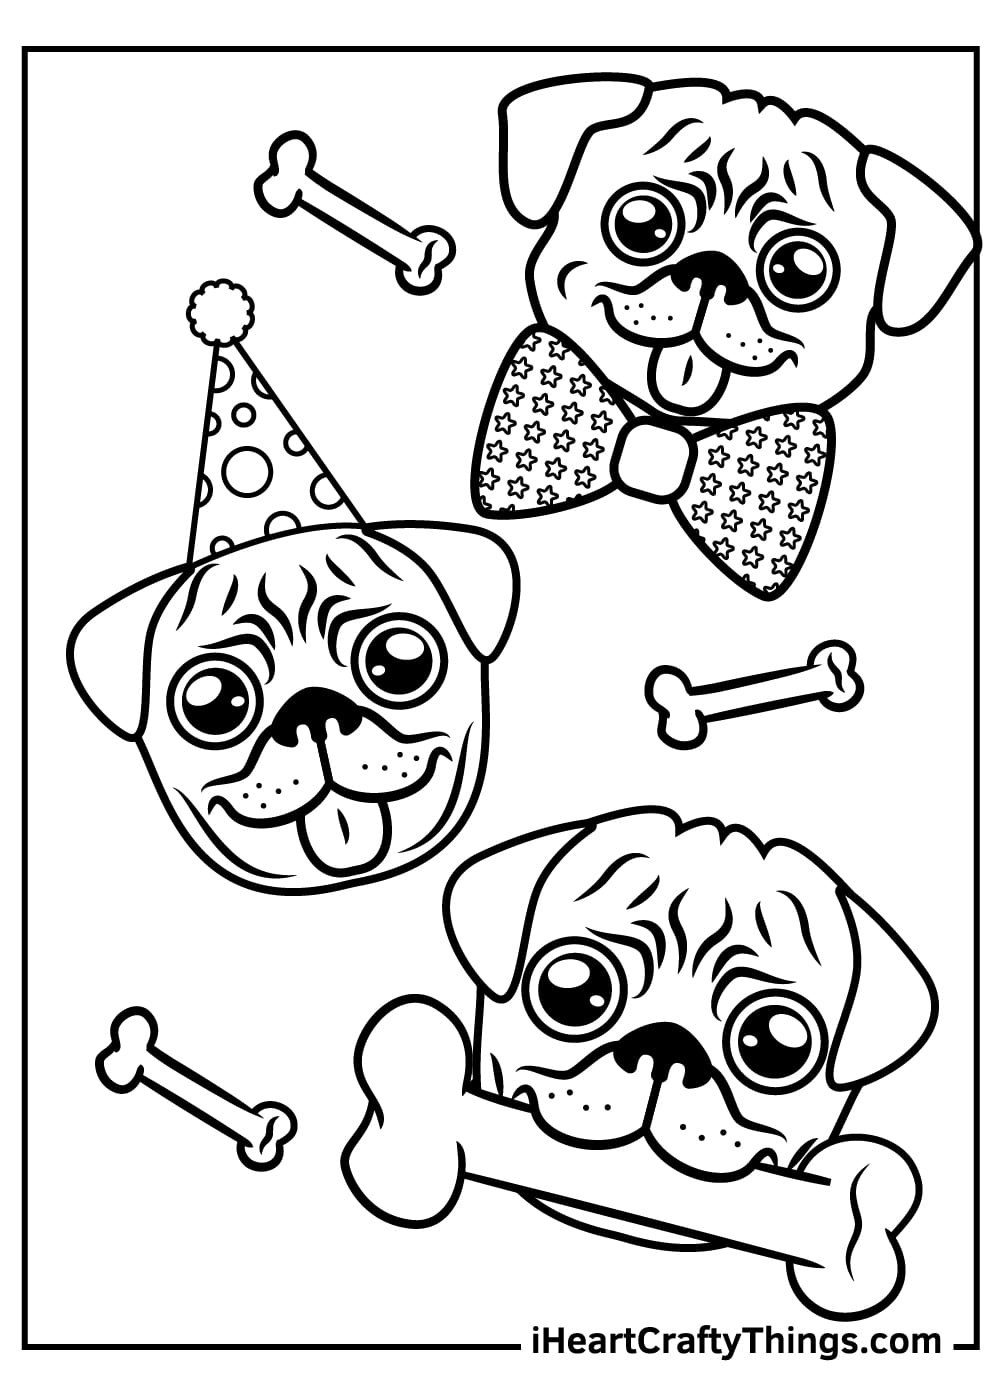 Puppy Image Coloring Page